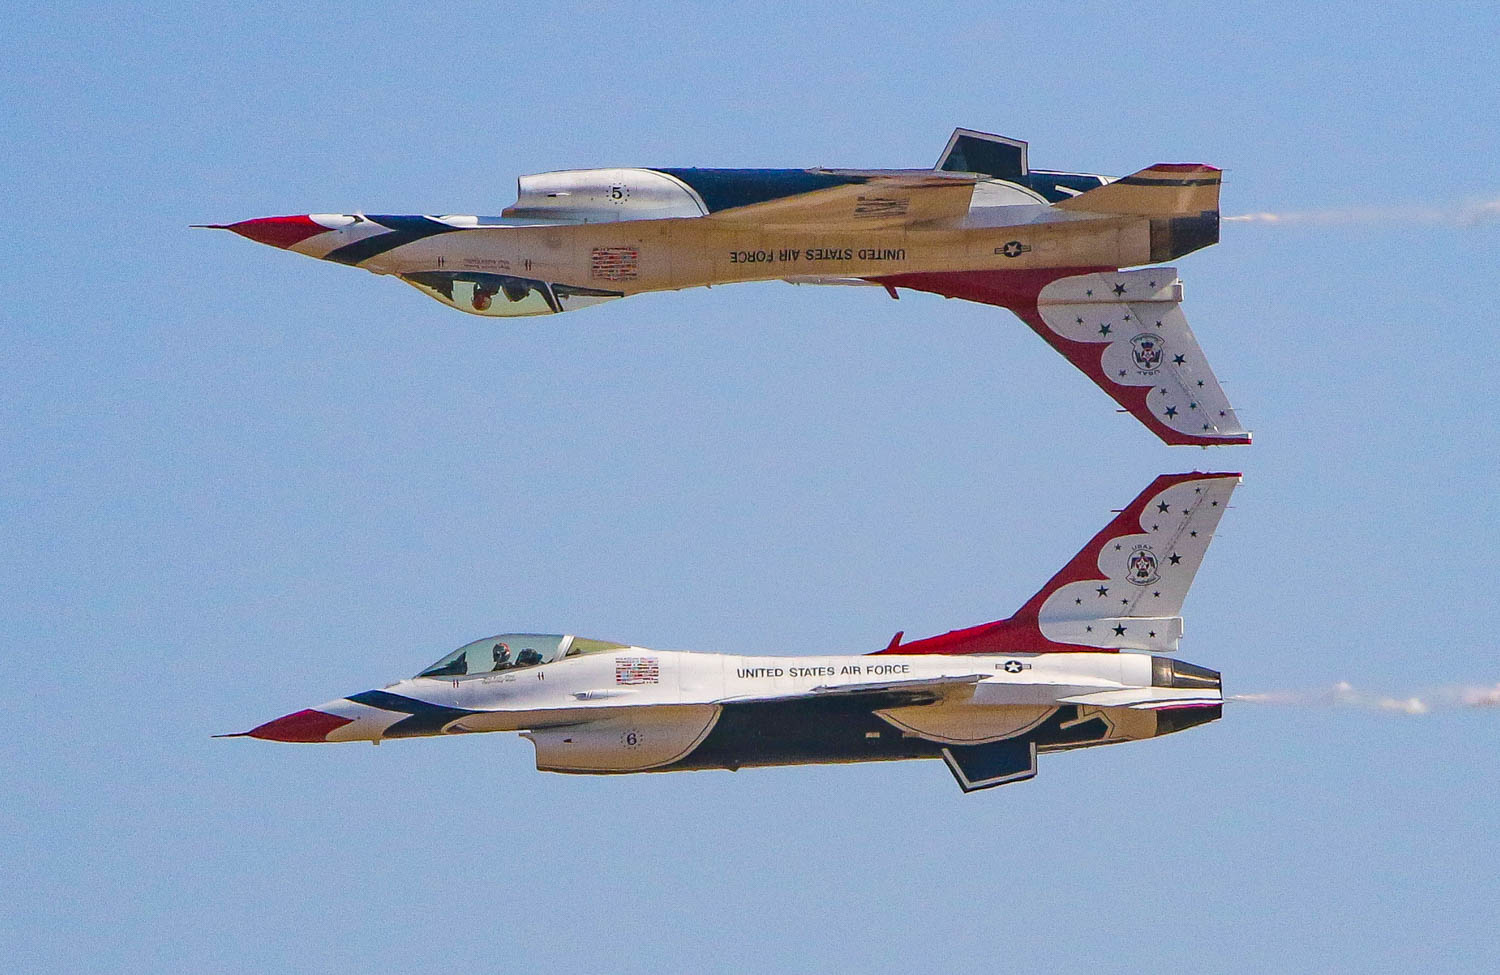 In pictures: 17th Capital Airshow delights thousands, breaks records 